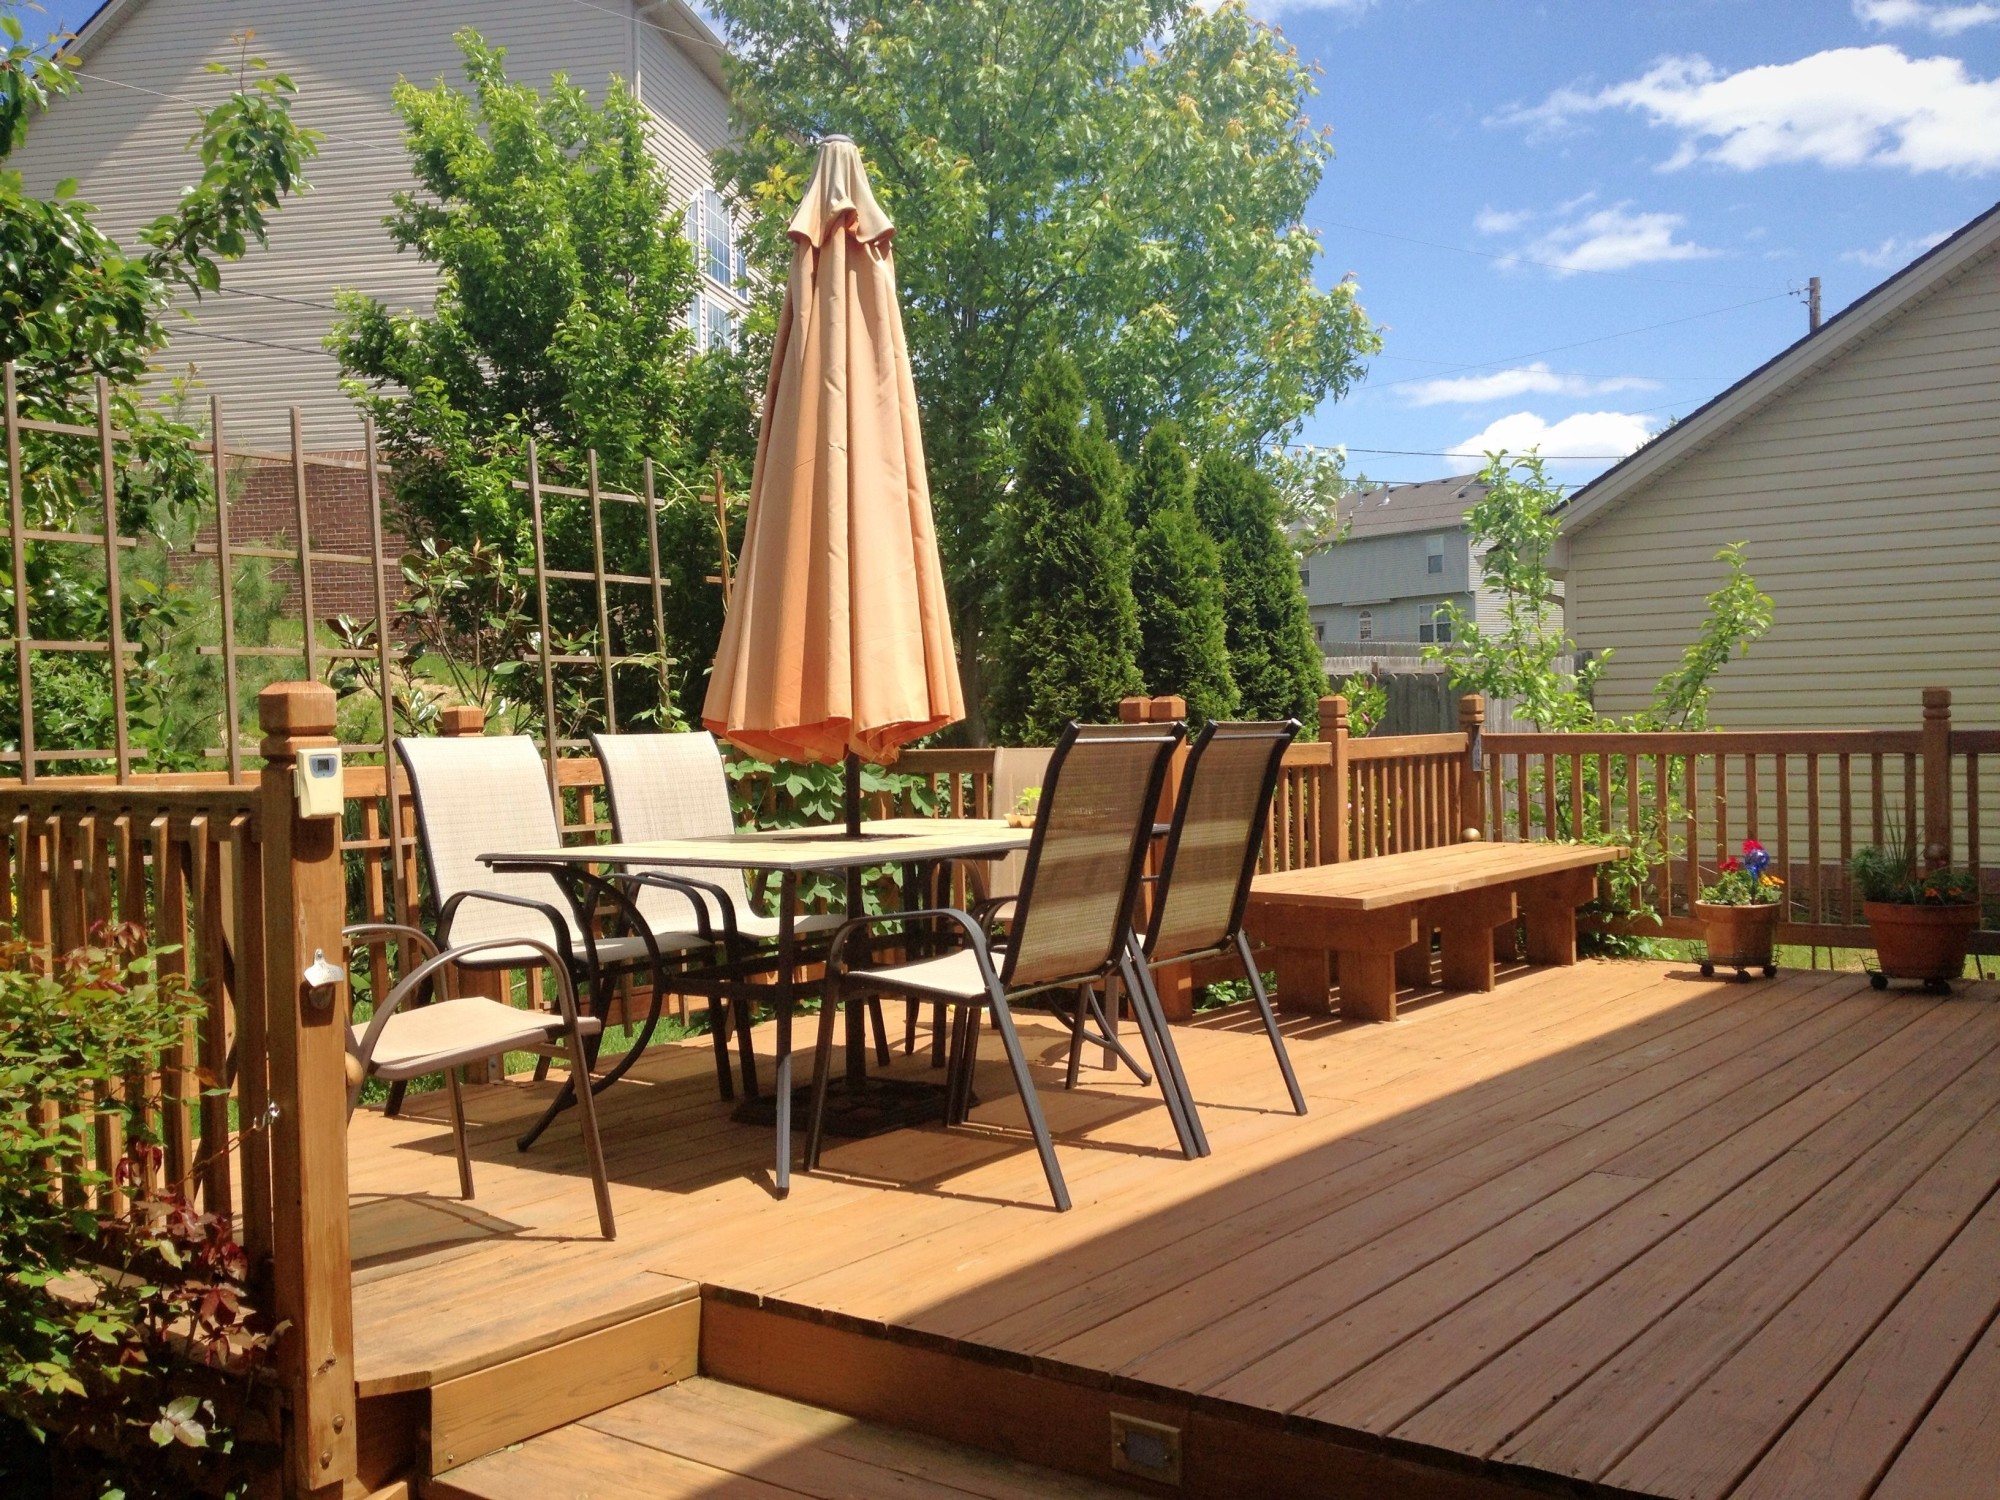 Should Deck Restoration Be Done by a Professional?